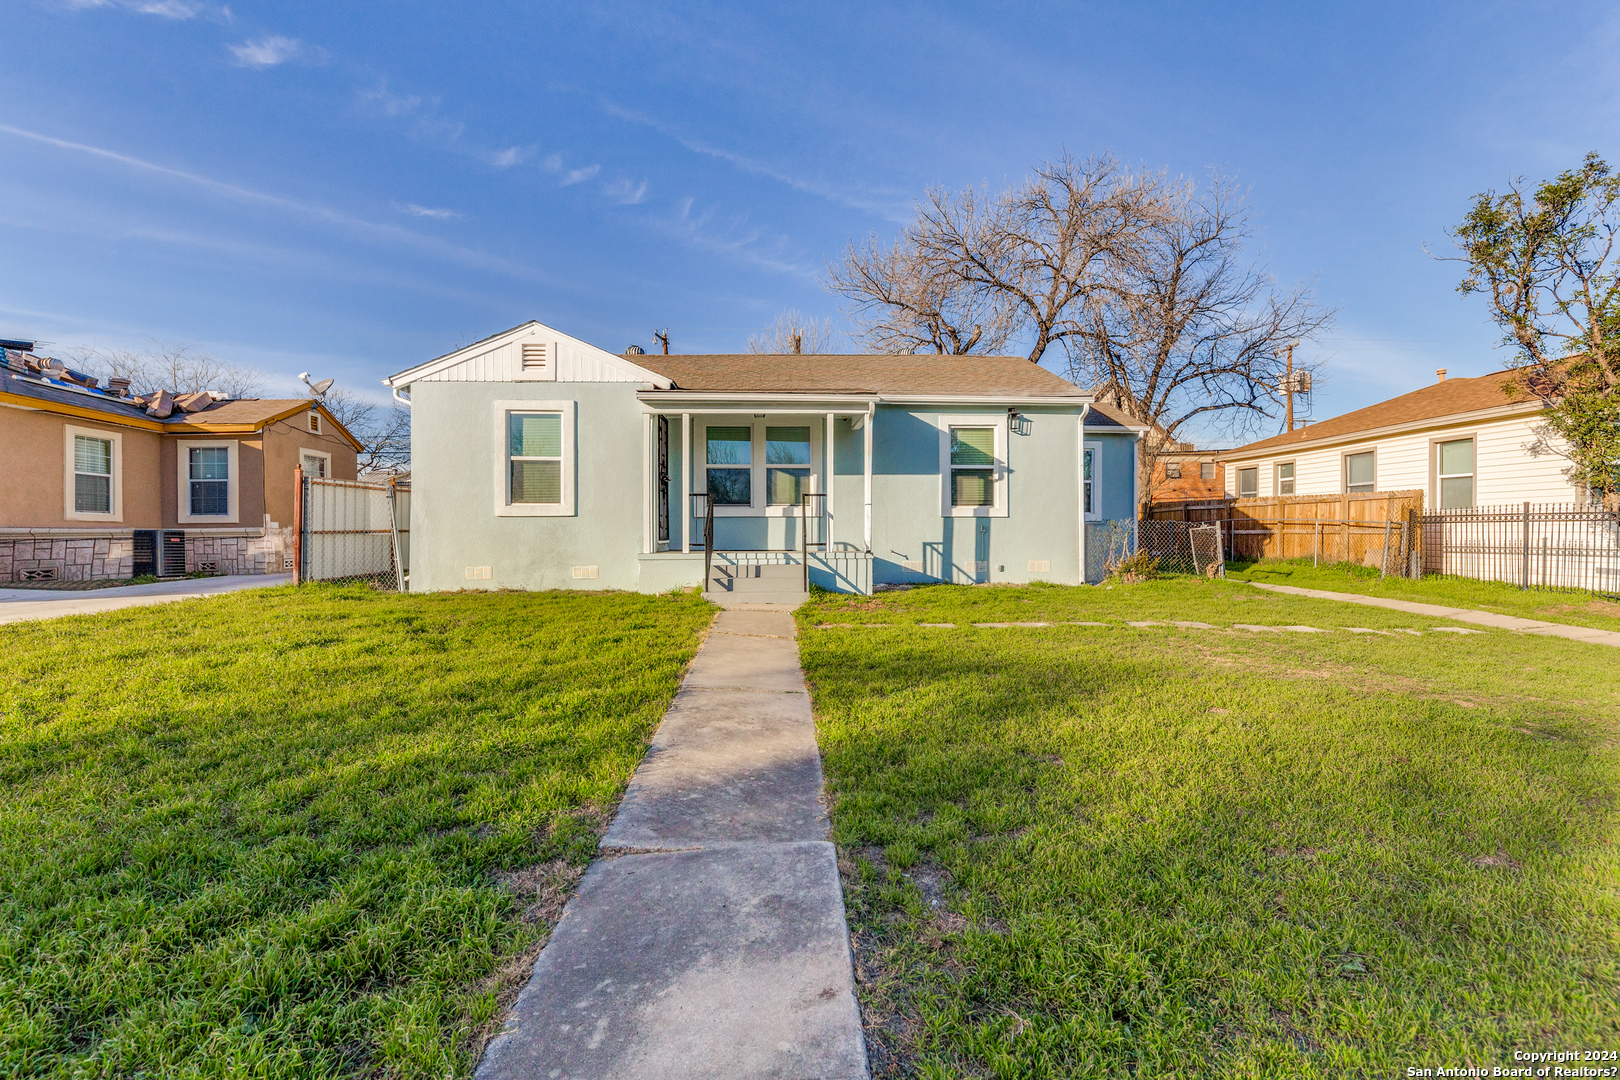 Photo of 217 Westminster Ave in San Antonio, TX